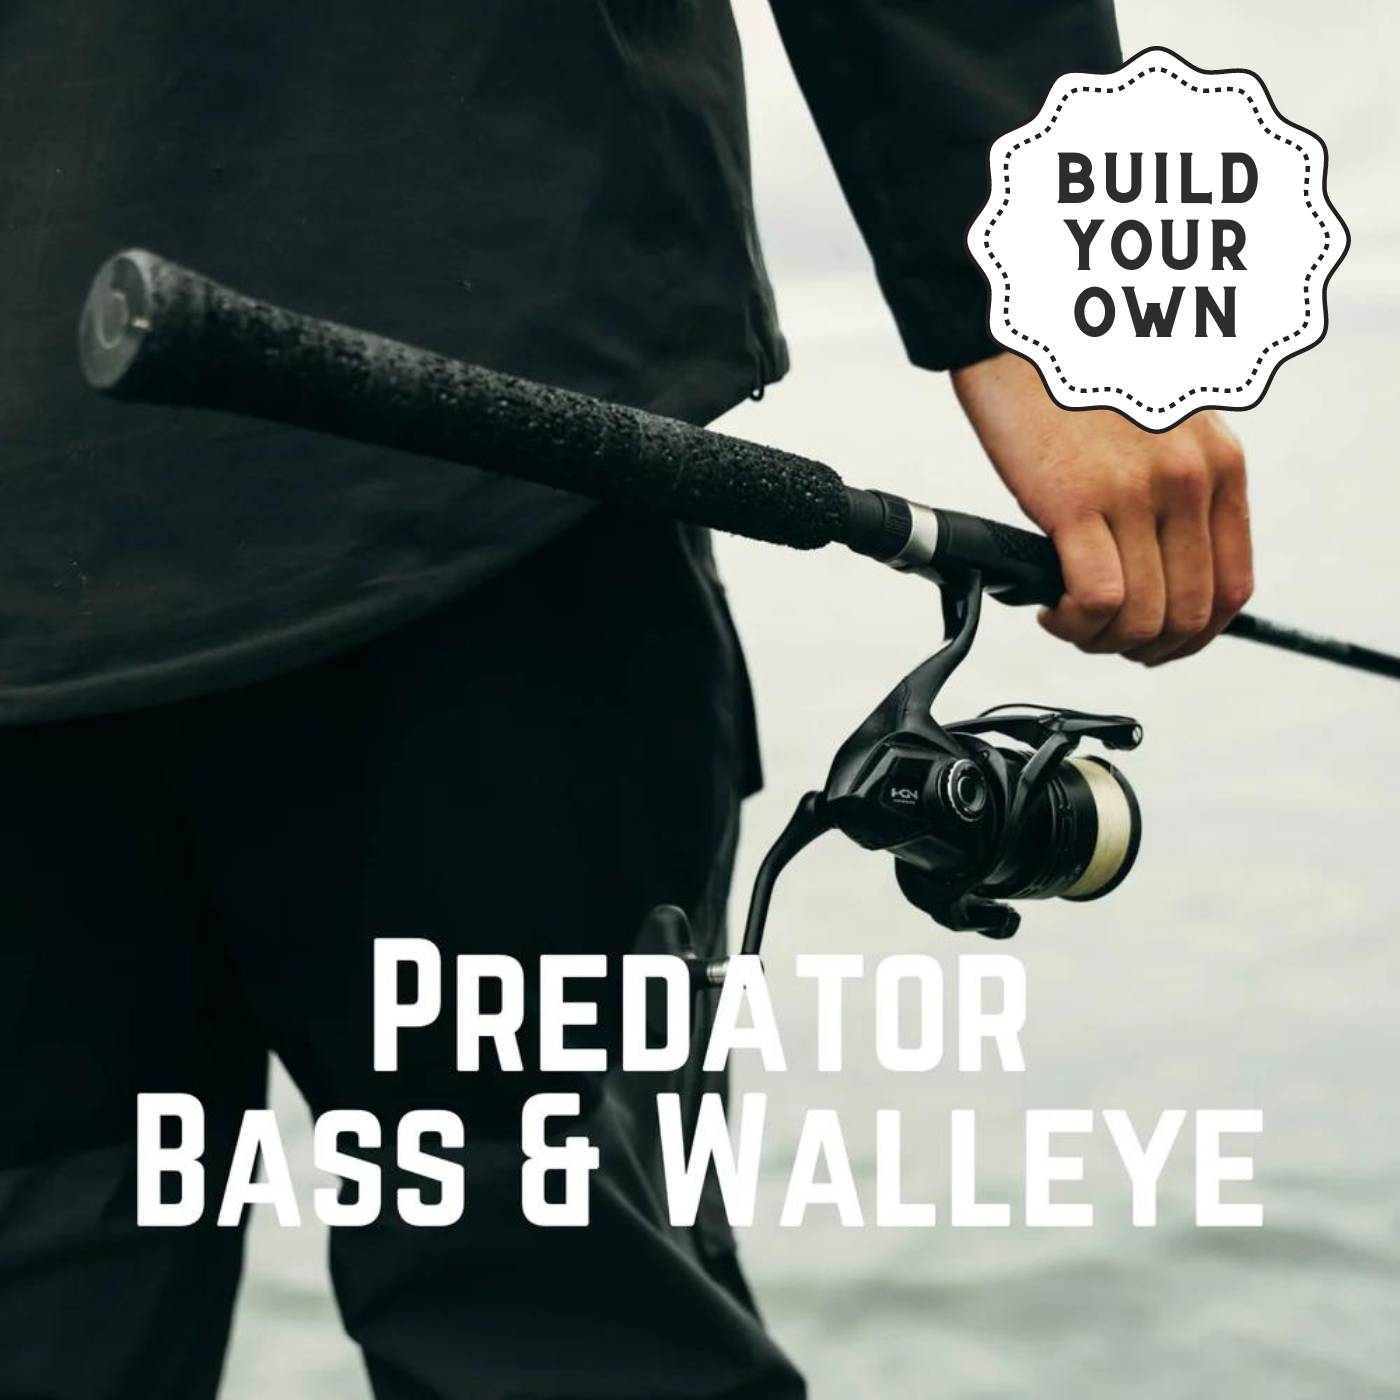 6 Rod and Reel Bass Fishing System